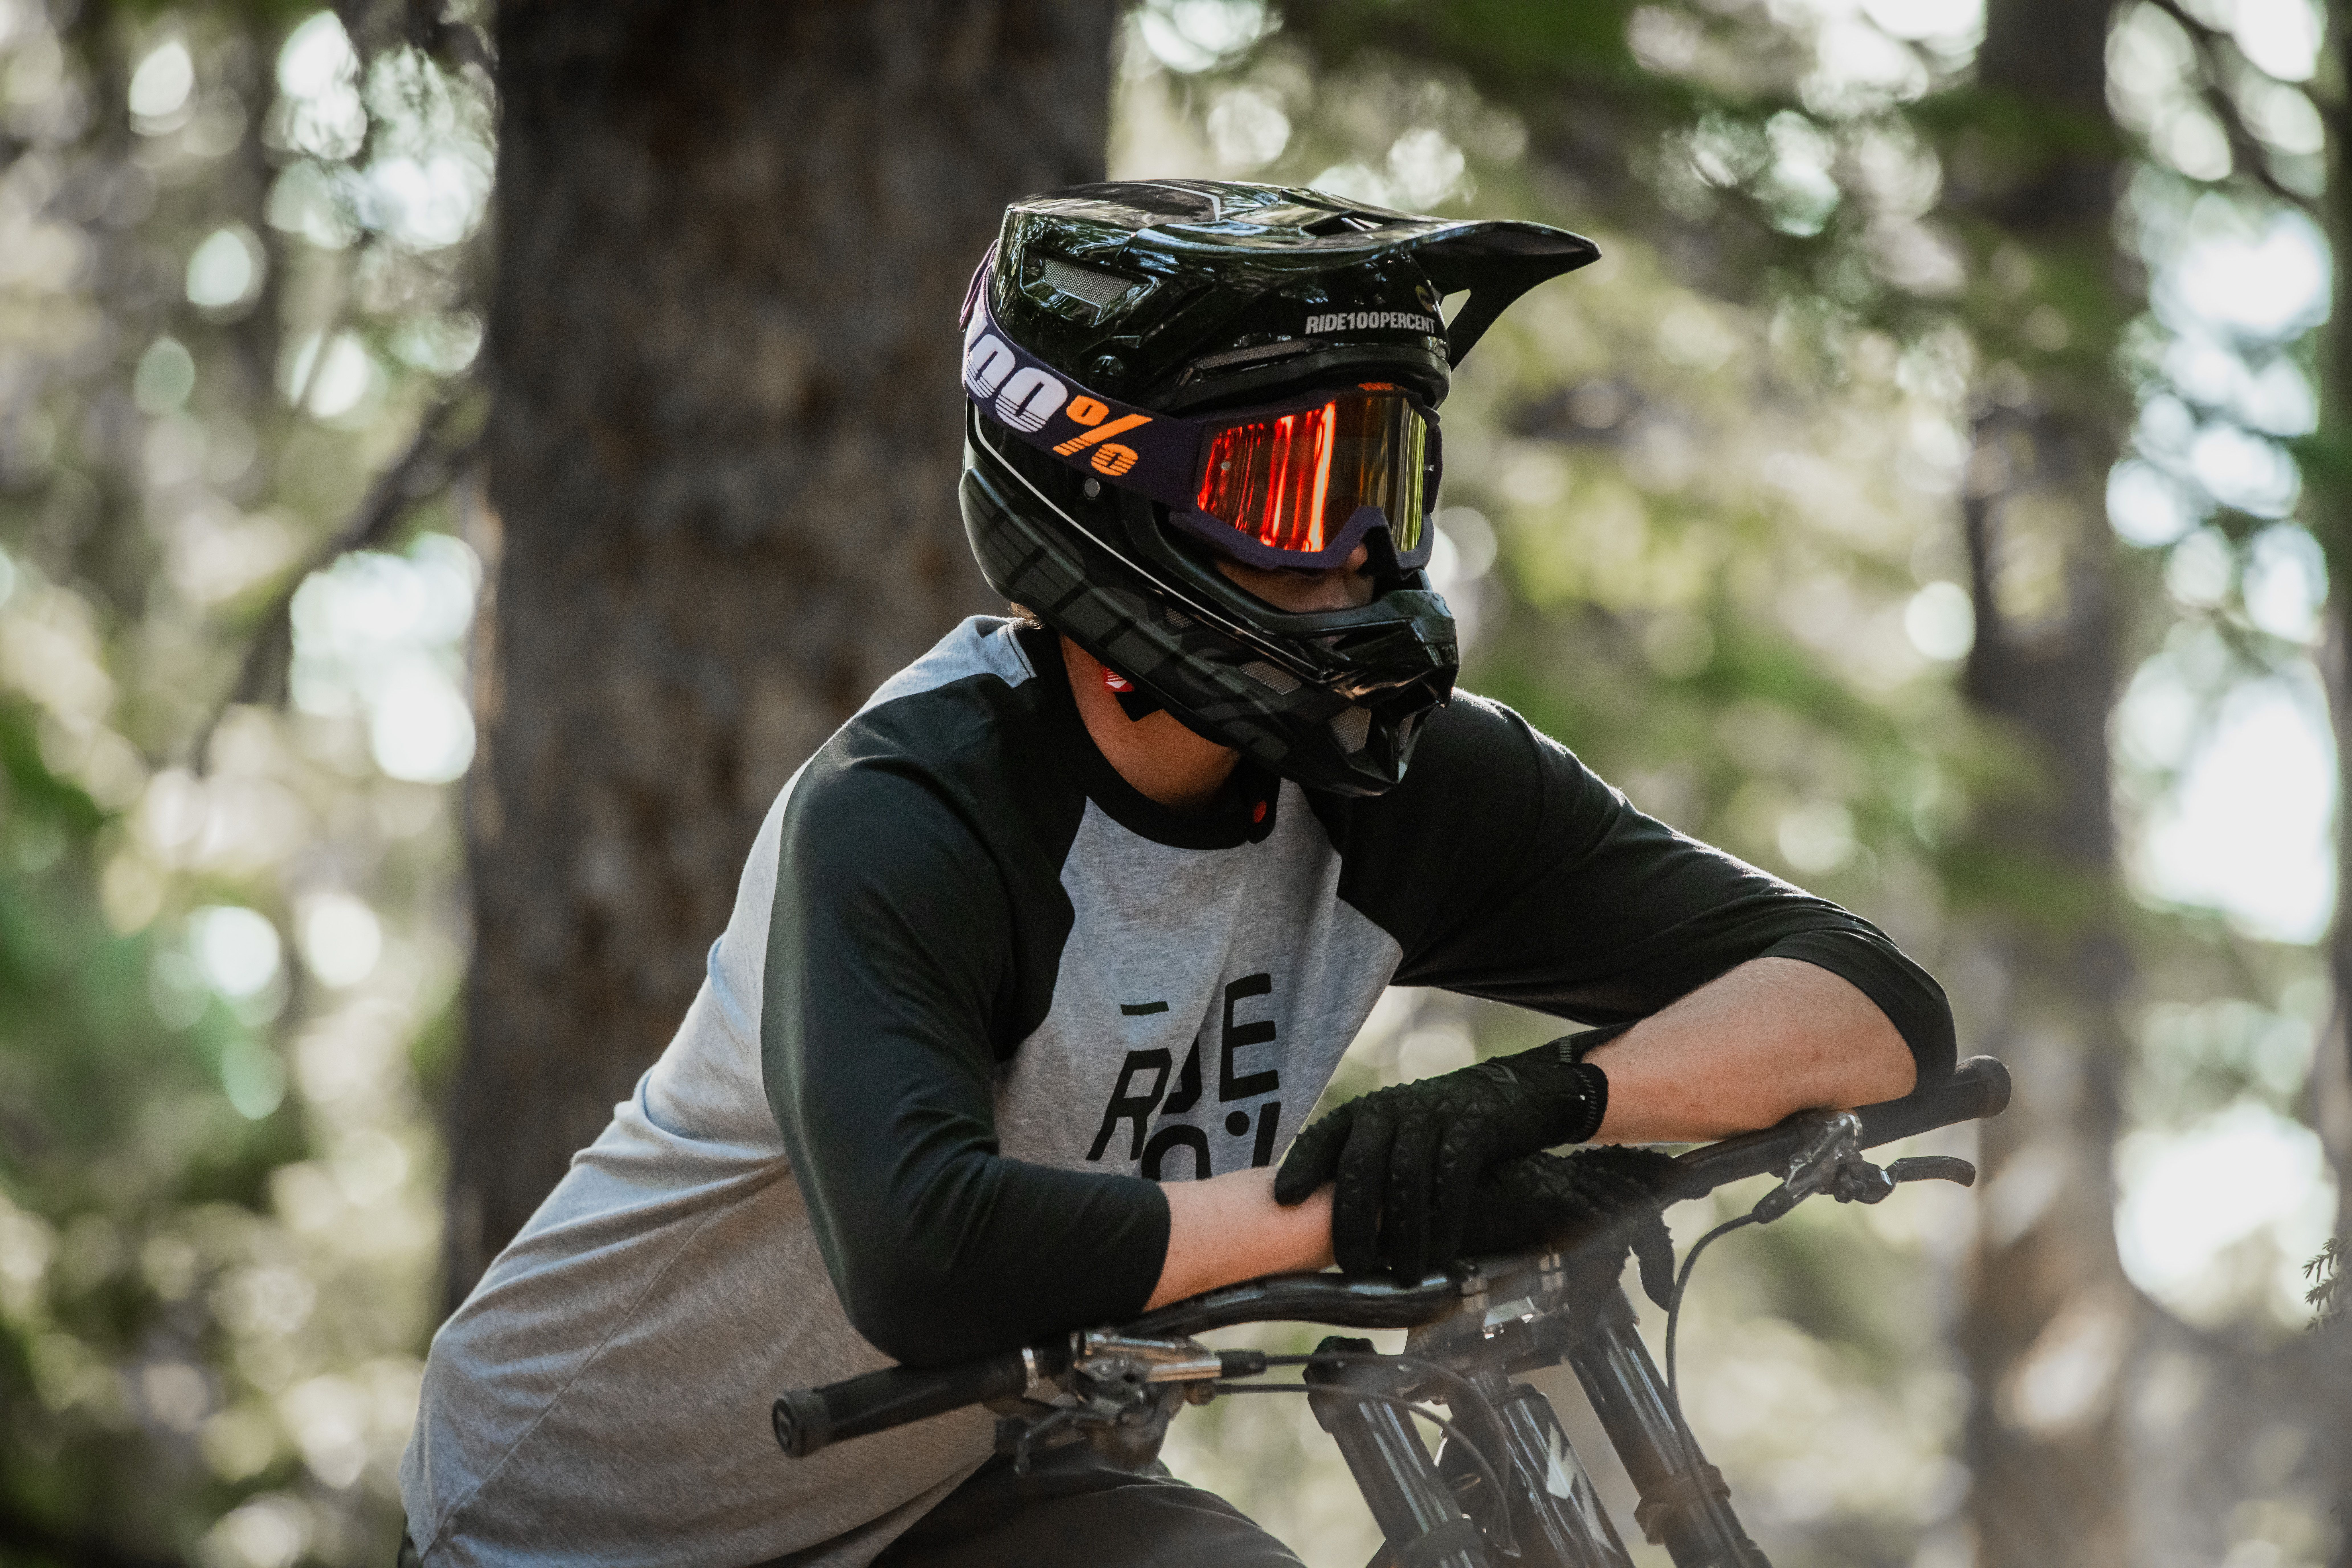 100% MTB – Full Protection For Charging Hard...